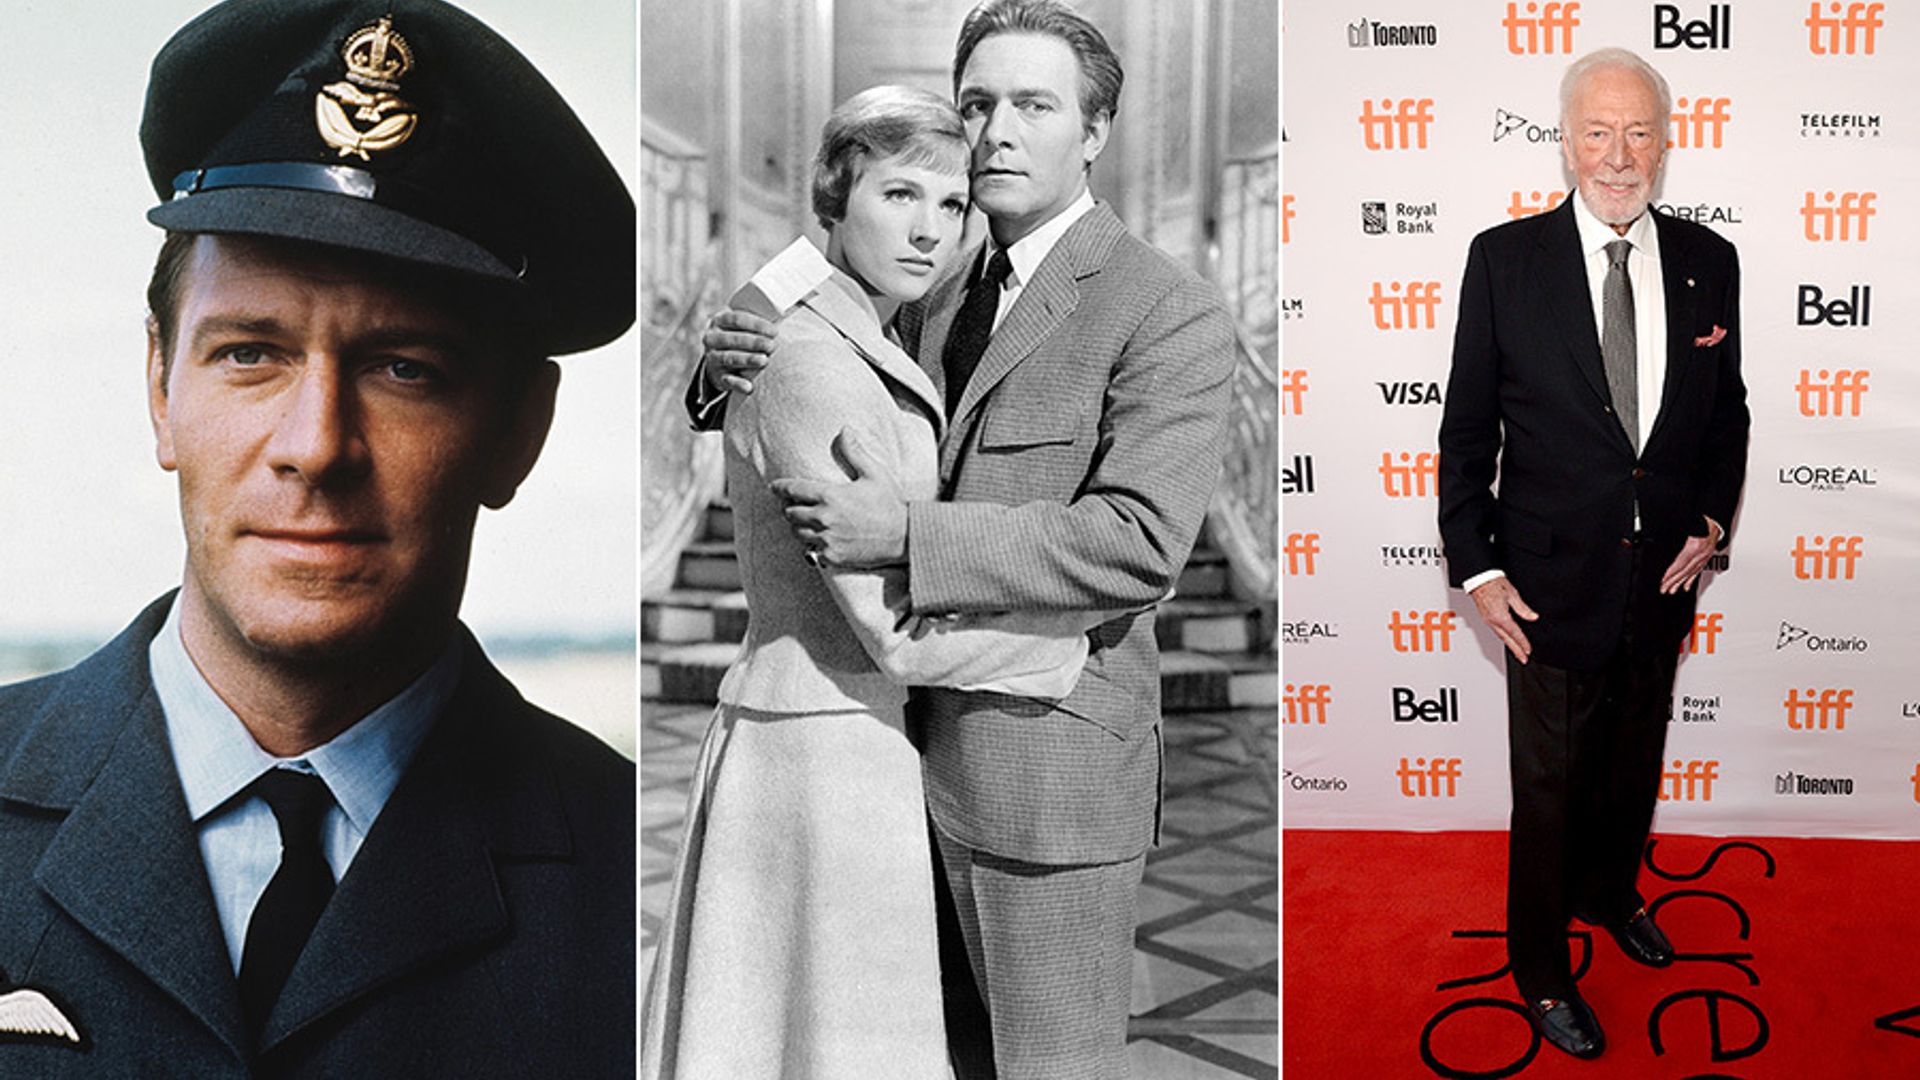 Happy 90th Birthday, Christopher Plummer! Look back at his best photos through the years